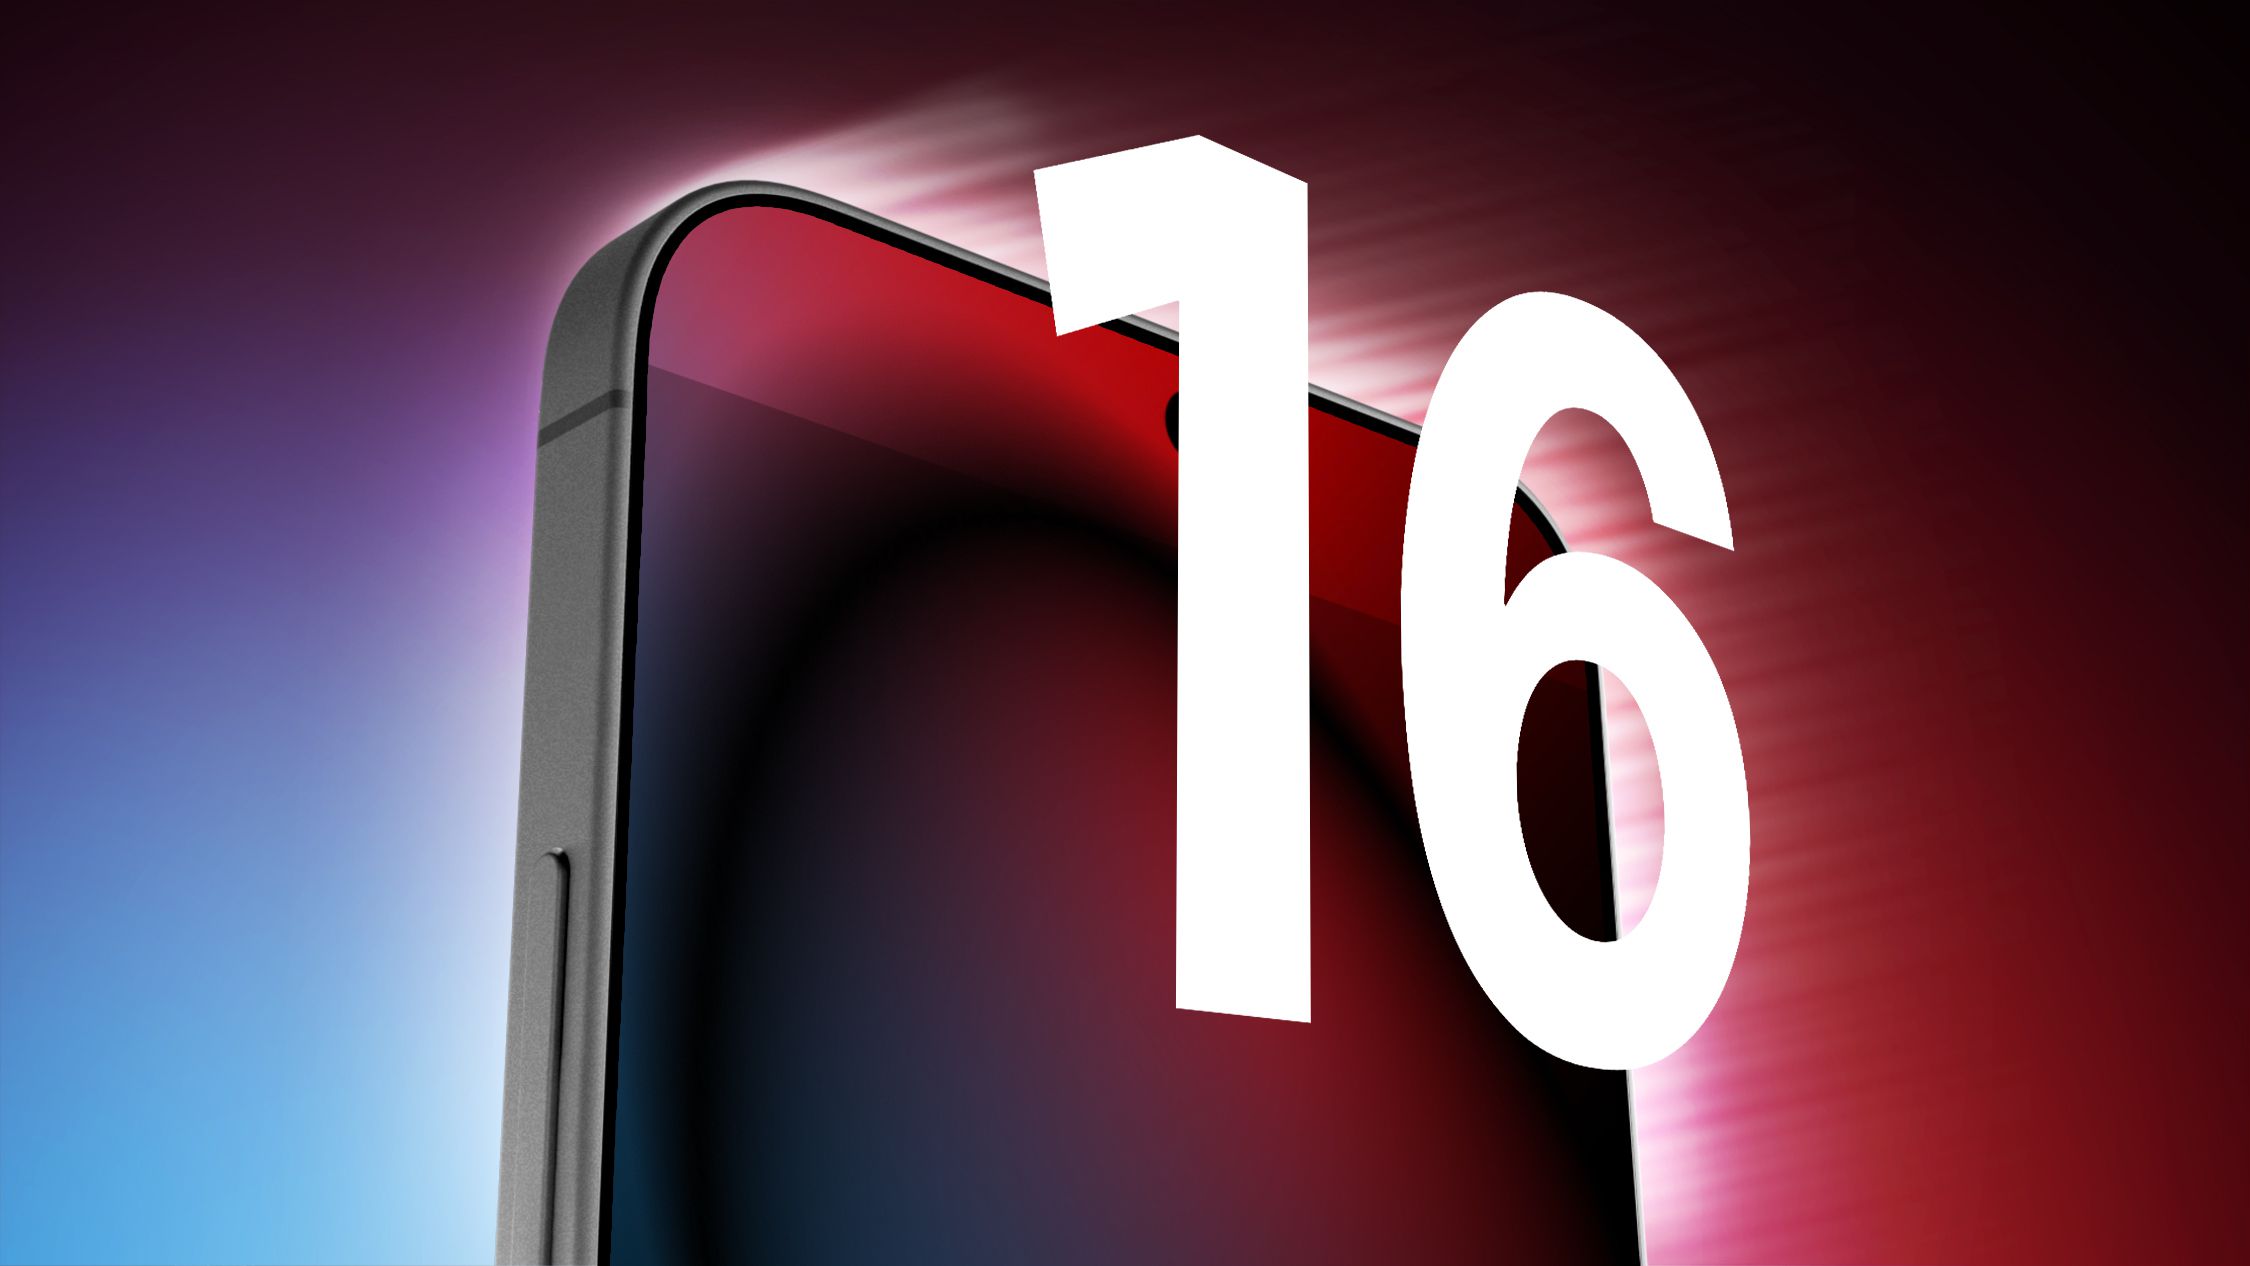 Gurman confirms that the iPhone 16 Pro’s screen size adds to the rumors